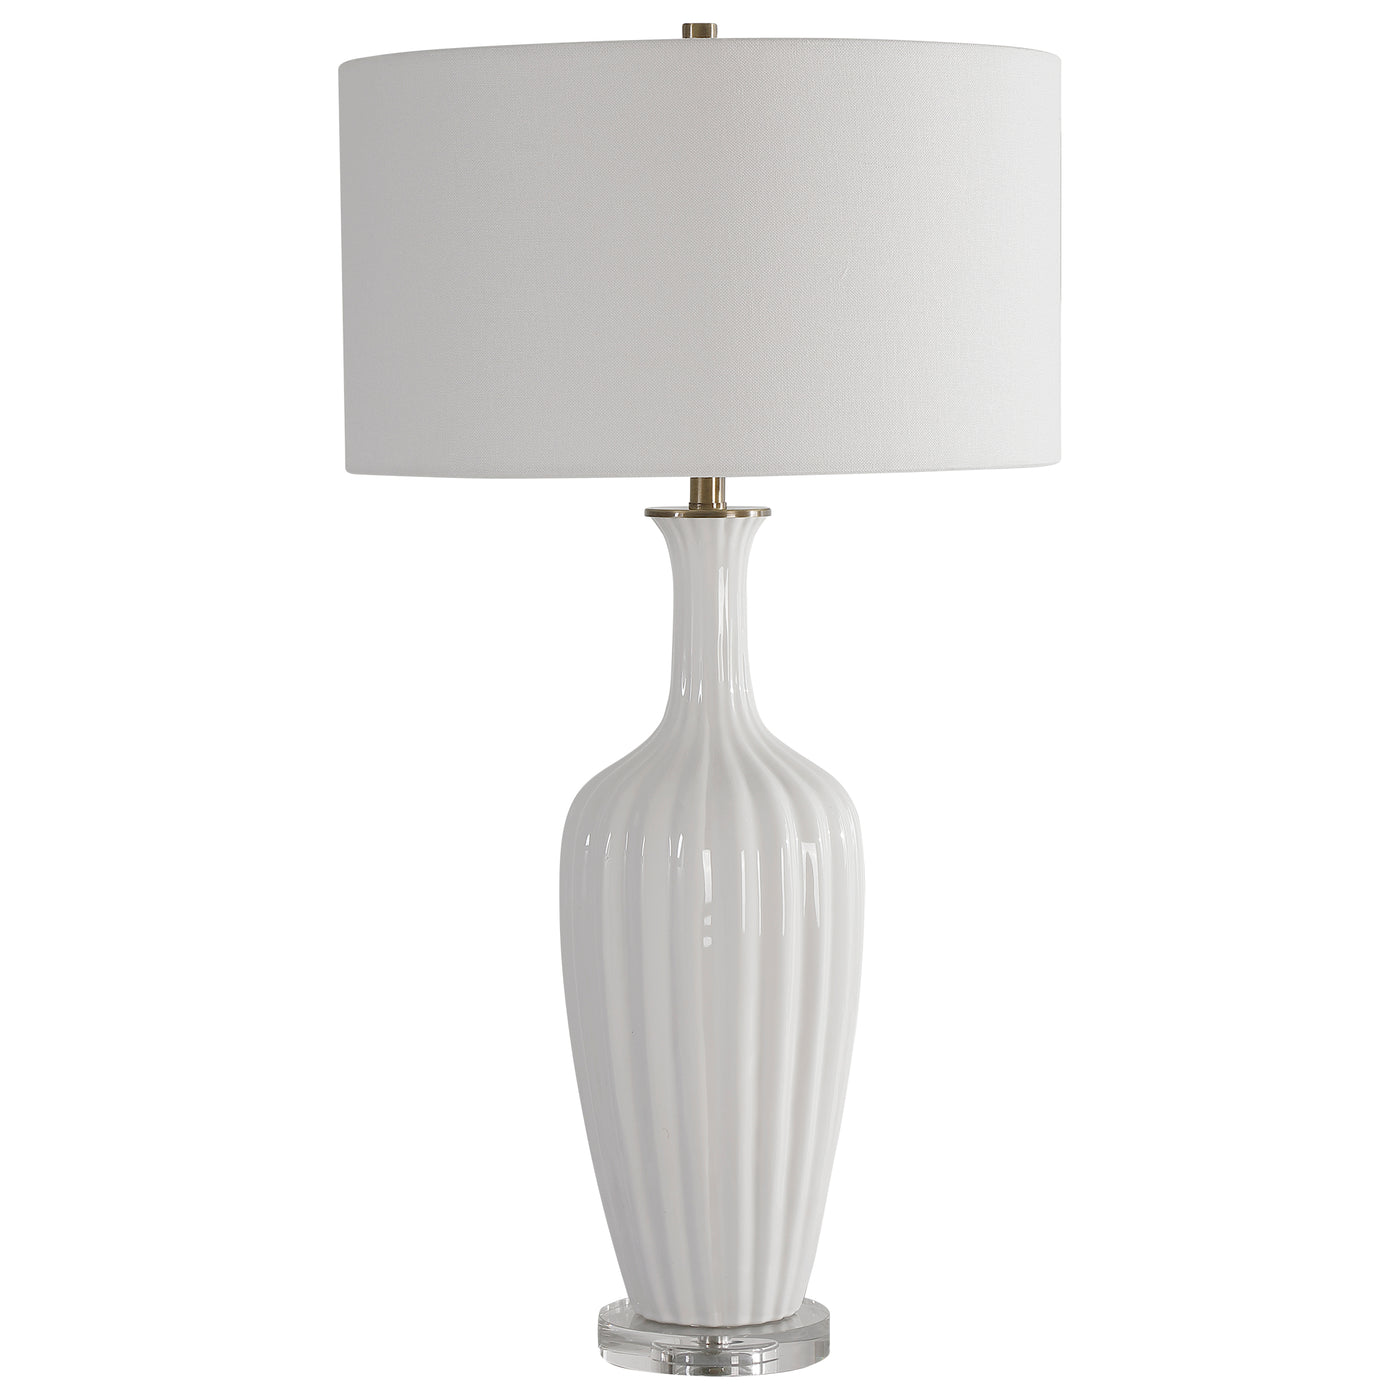 Displaying A Traditional Elegance, This Table Lamp Features A Fluted Ceramic Base In A Gloss White Glaze With Brushed Bras...